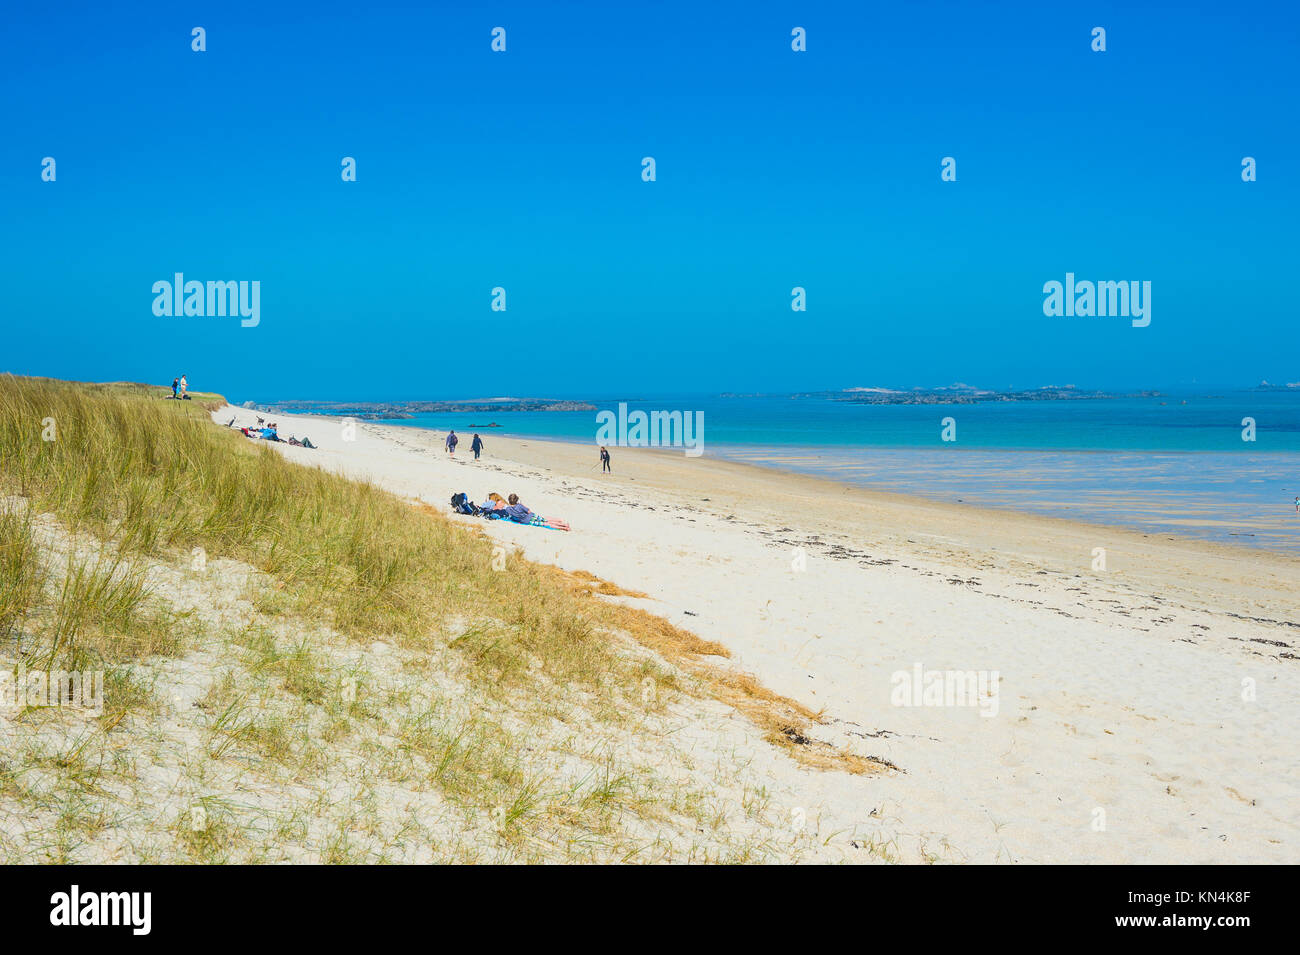 Overlook over Shell beach, Herm, Guernsey, Channel Islands, United Kingdom Stock Photo